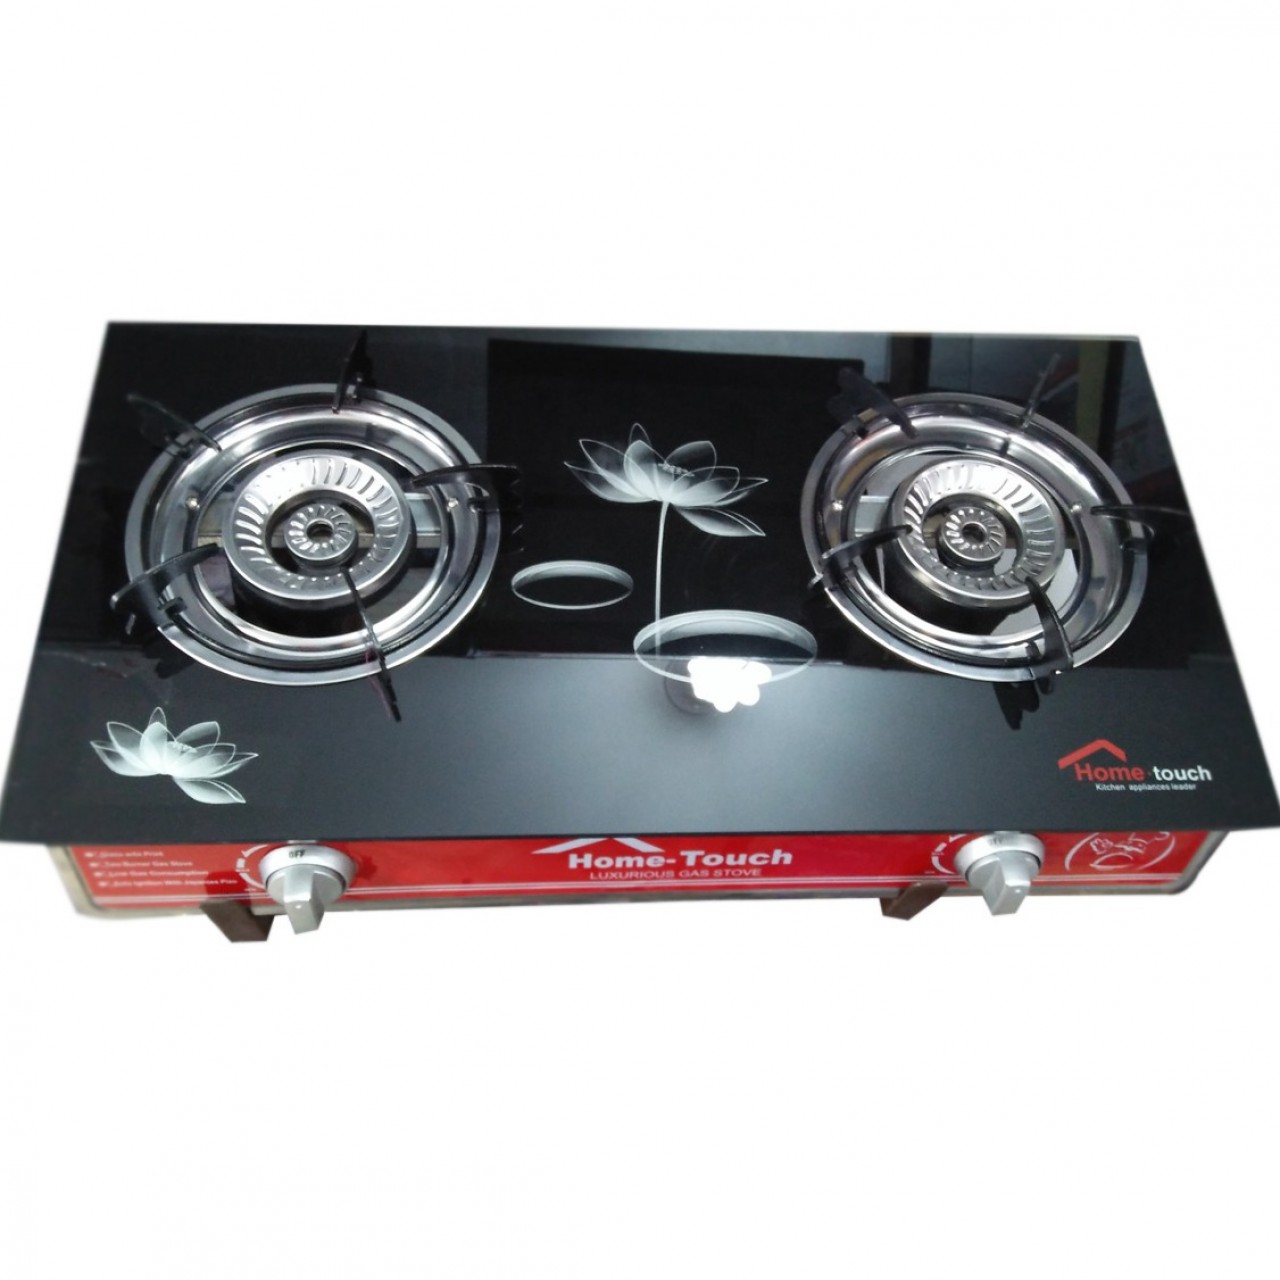 Home-Touch 2 Burner Luxurious Gas Stove - Kitchen Appliances